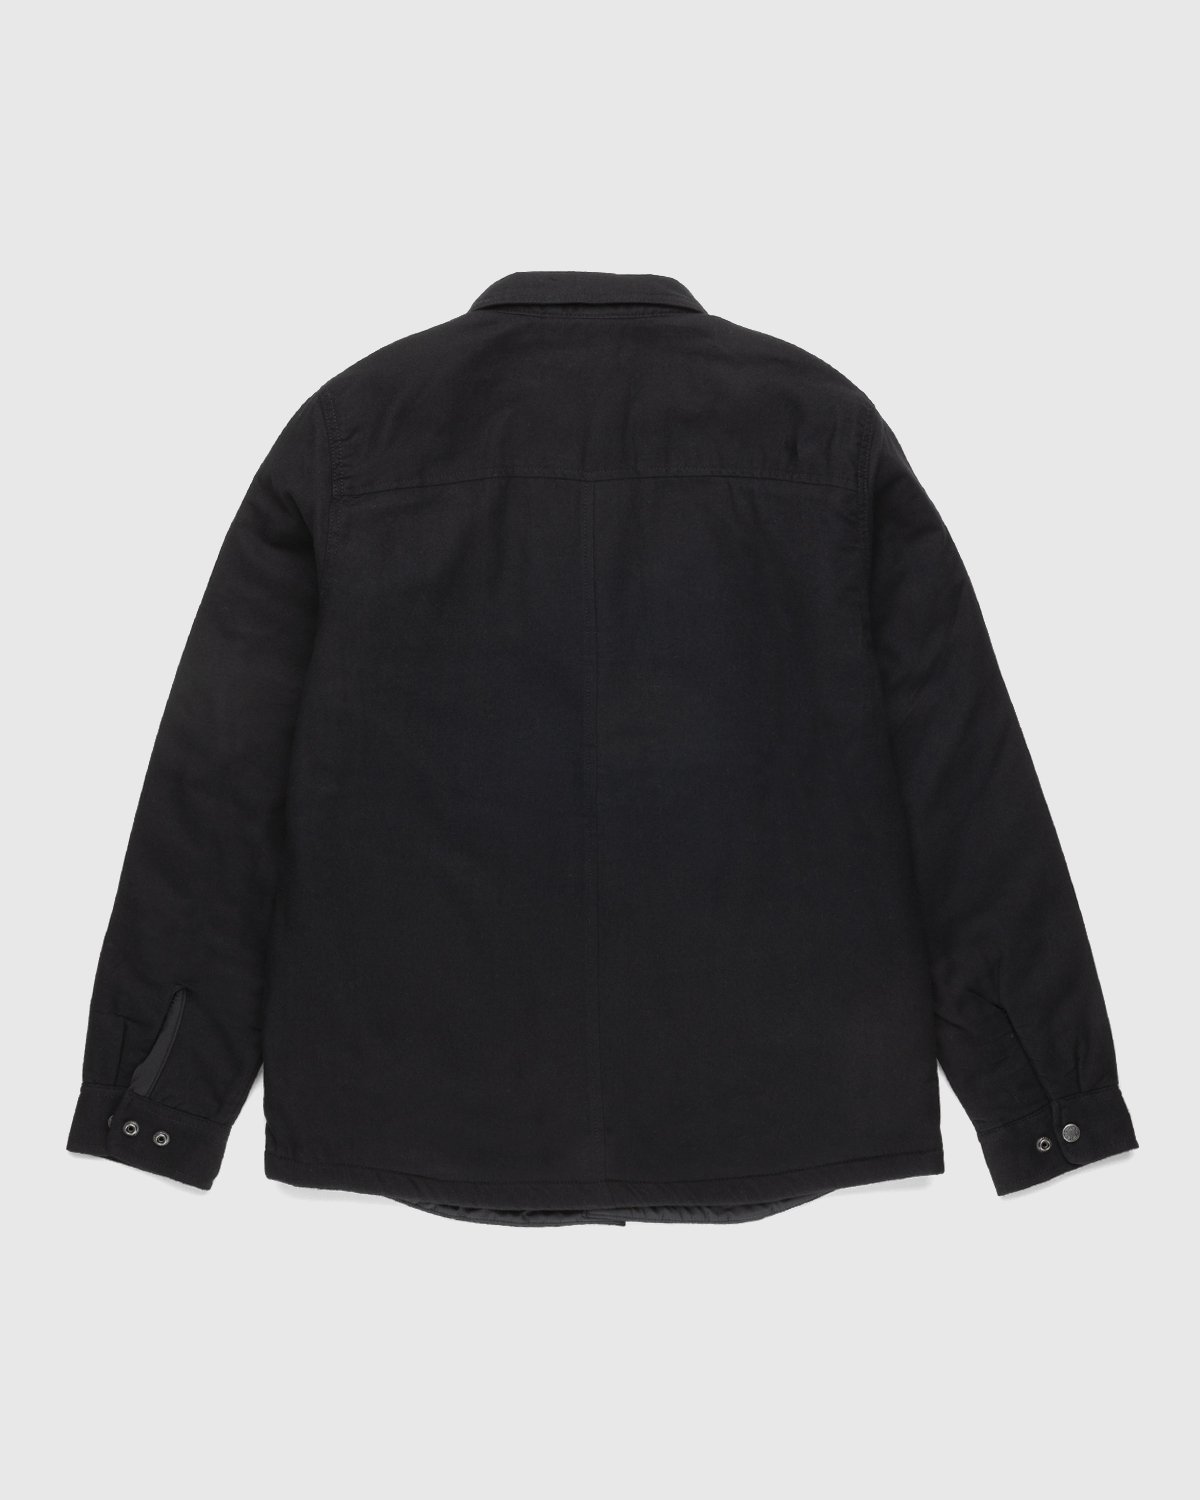 The North Face - Campshire Shirt Black - Clothing - Black - Image 2